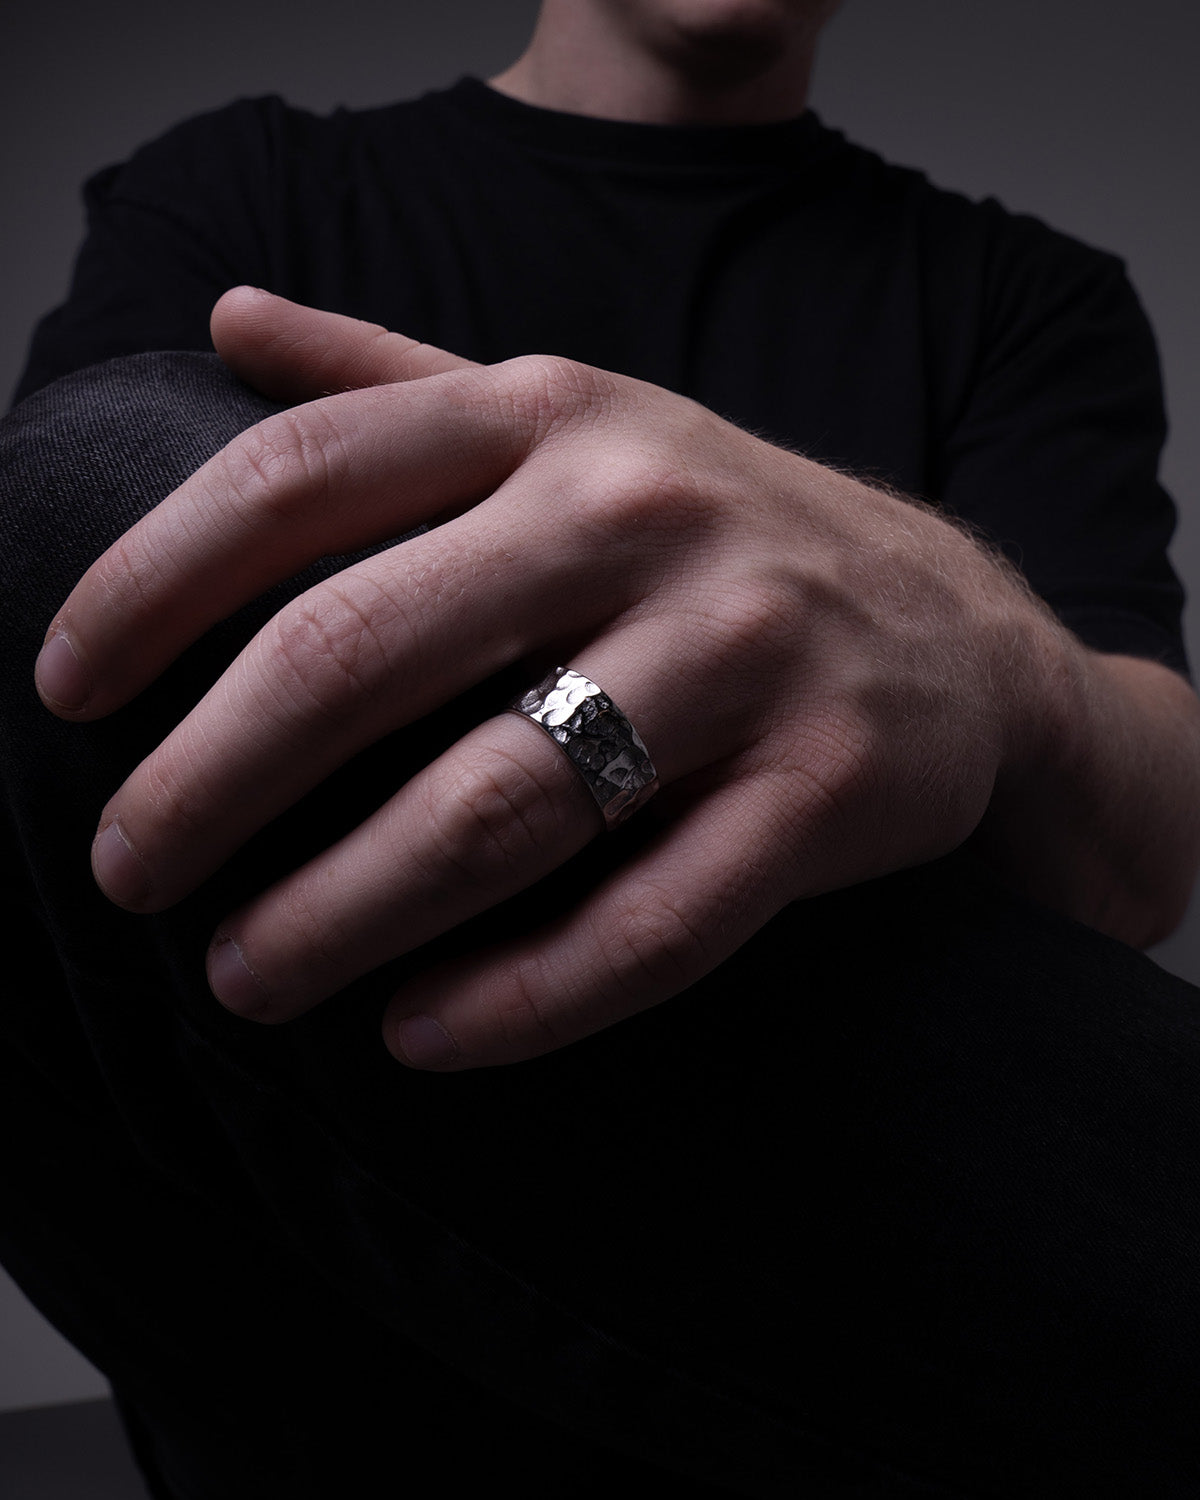 LUNE ring, designed in Montreal and made of waterproof and hypoallergenic stainless steel in a silver color. Its unique design boasts delicate bumps, embodying a perfectly imperfect aesthetic inspired by the lunar landscape with its craters and golden reflections.